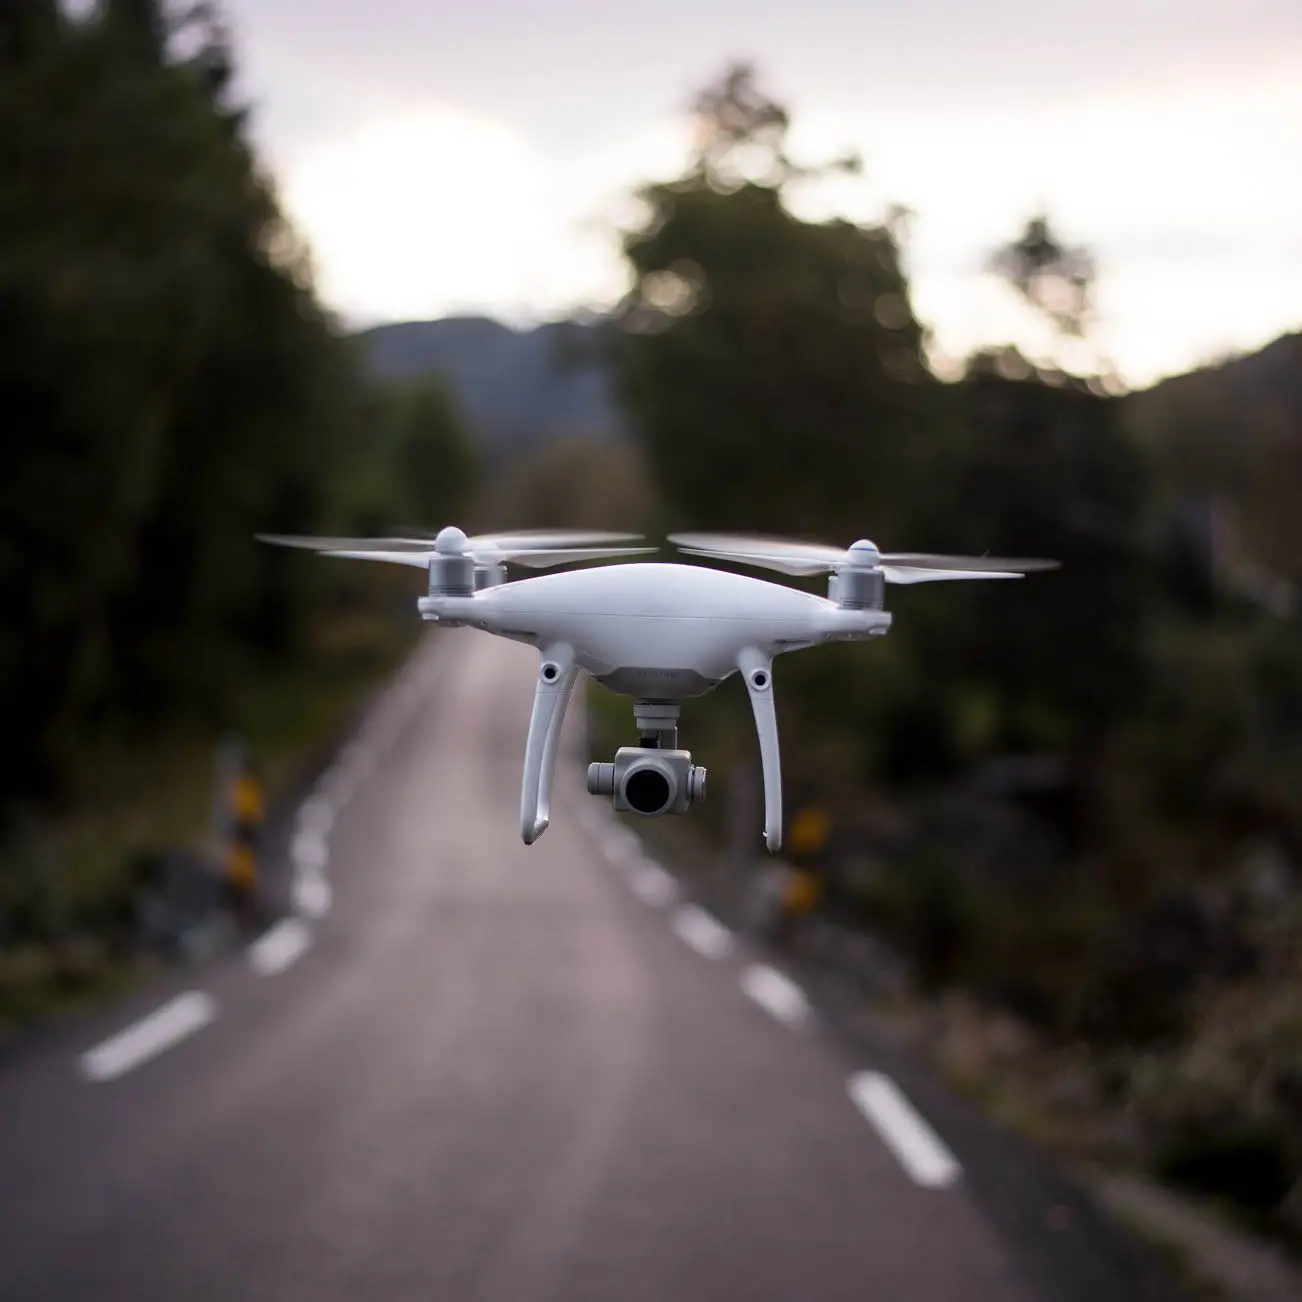 Drone flying over road